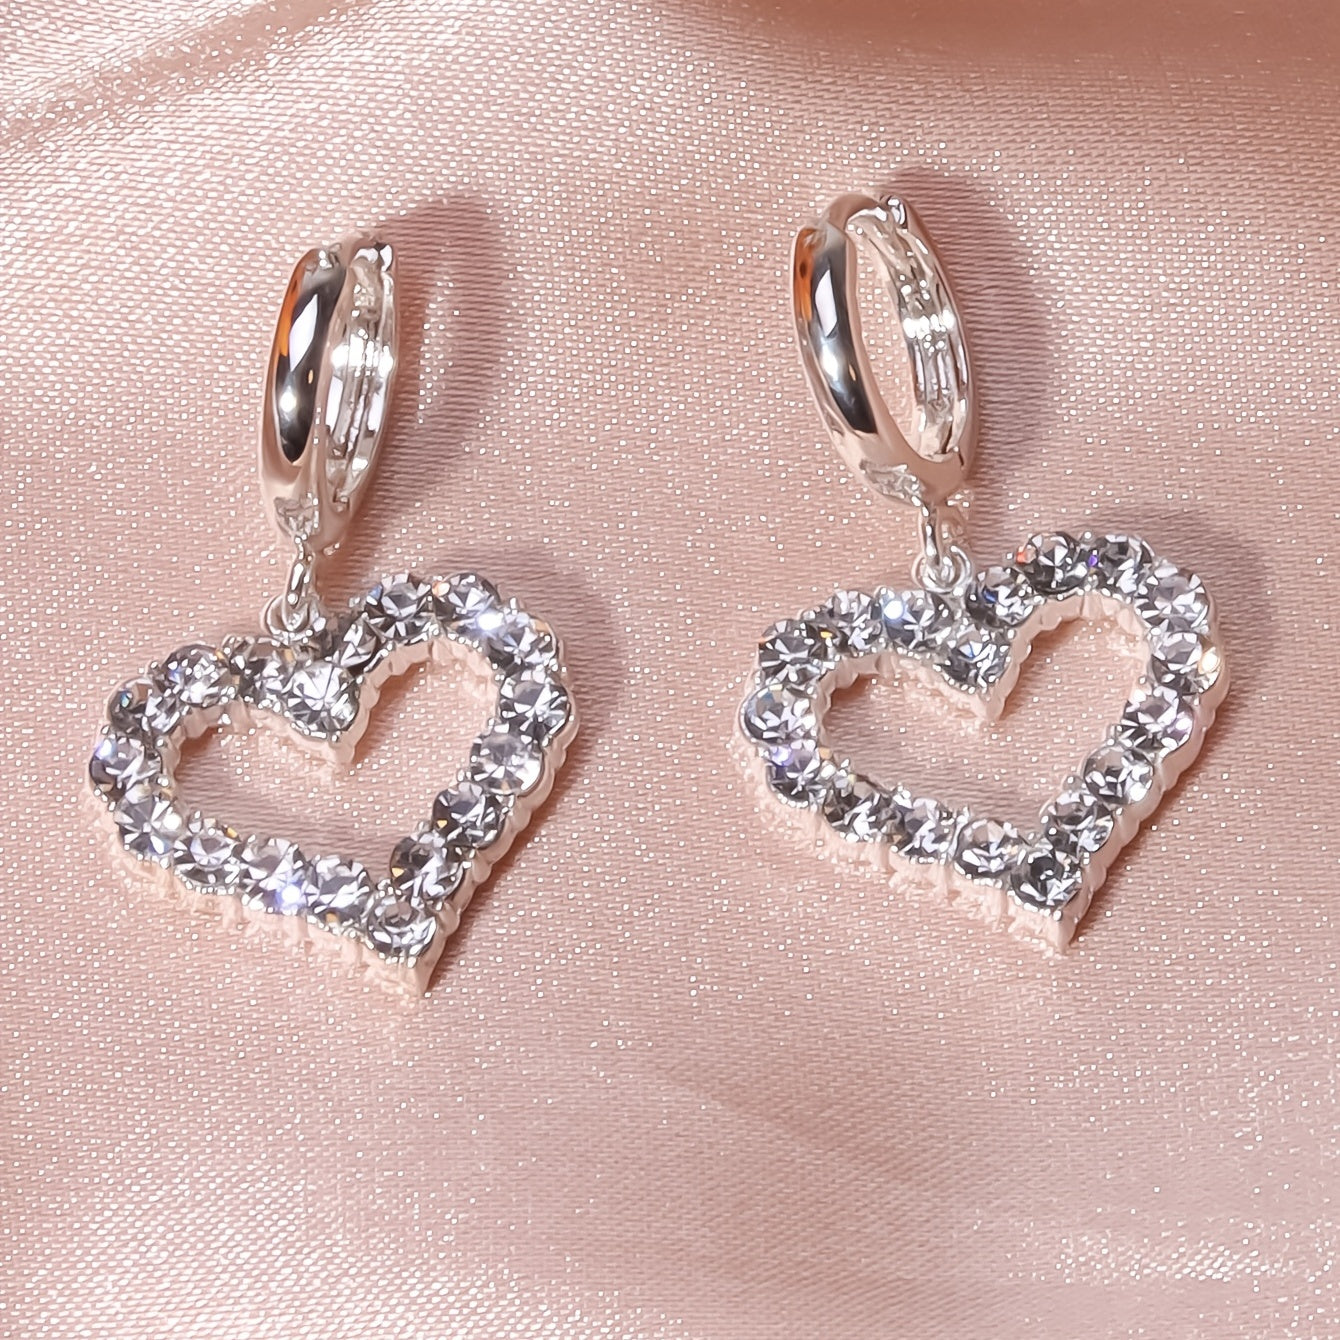 Hollow Heart-Shaped Full Rhinestone Drop Hoop Earrings Silver Plated Delicate Jewelry For Women Girls Valentines Day Decoration Gifts